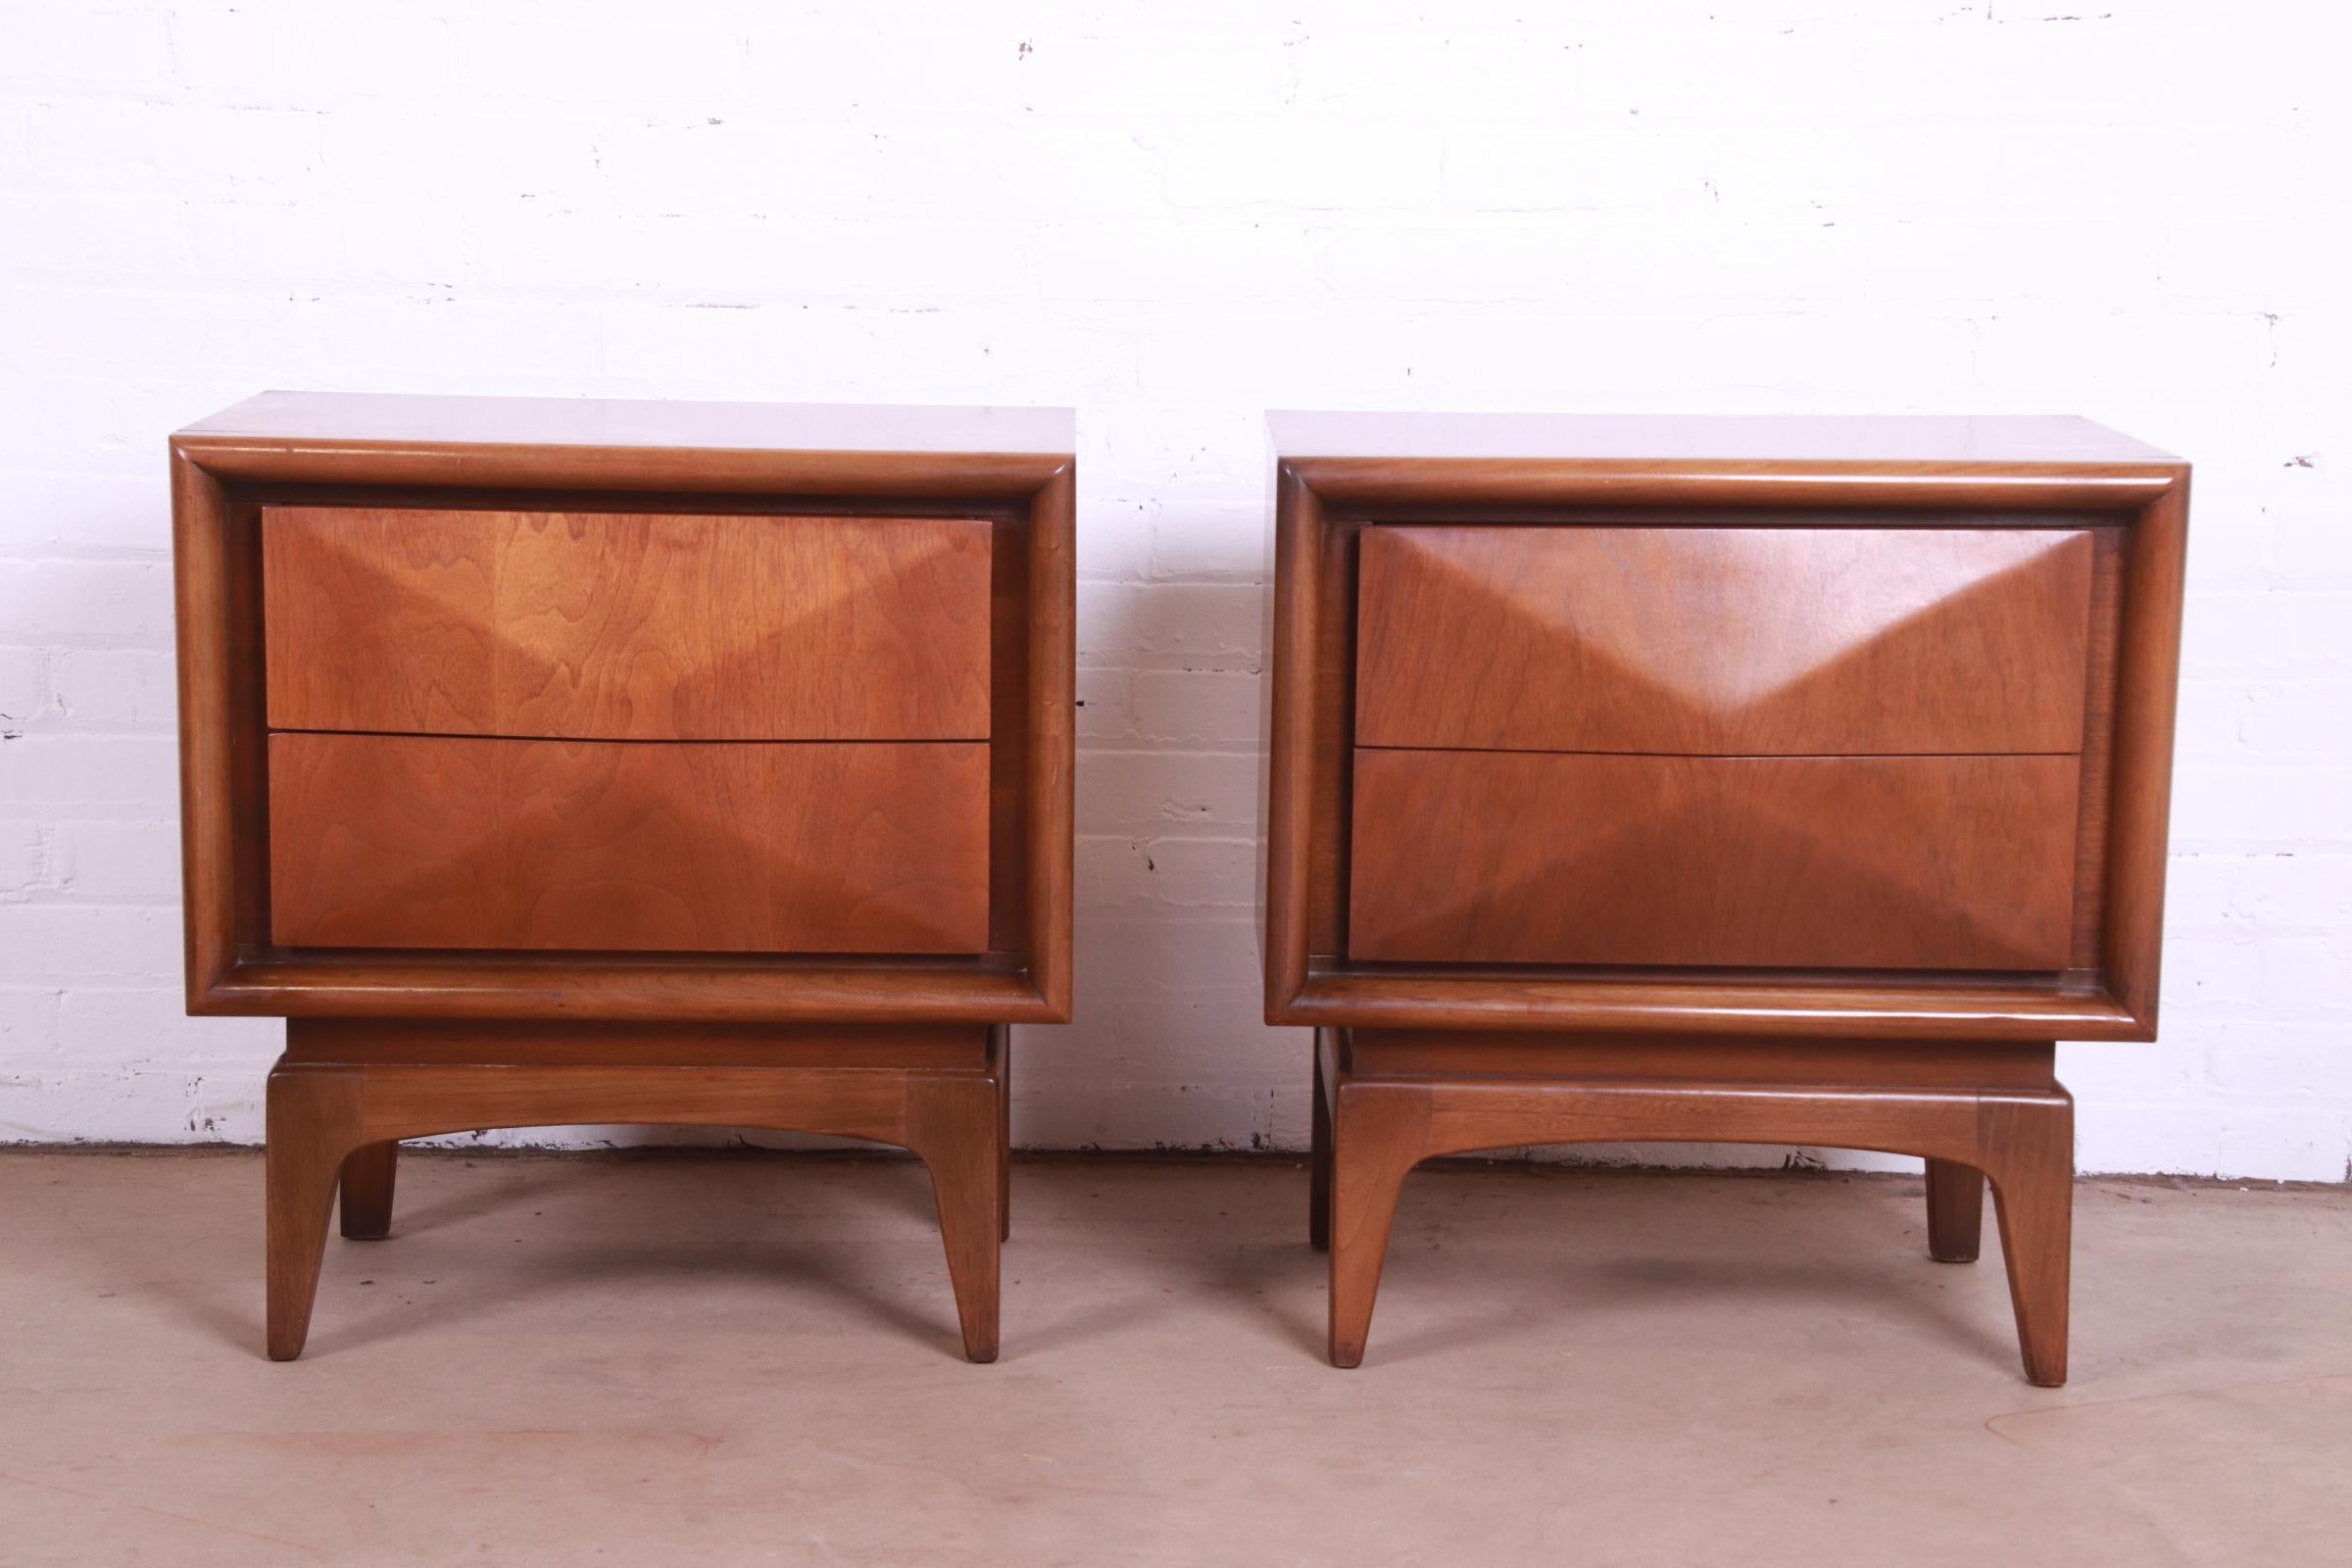 American Mid-Century Modern Sculpted Walnut Diamond Front Nightstands by United, Pair